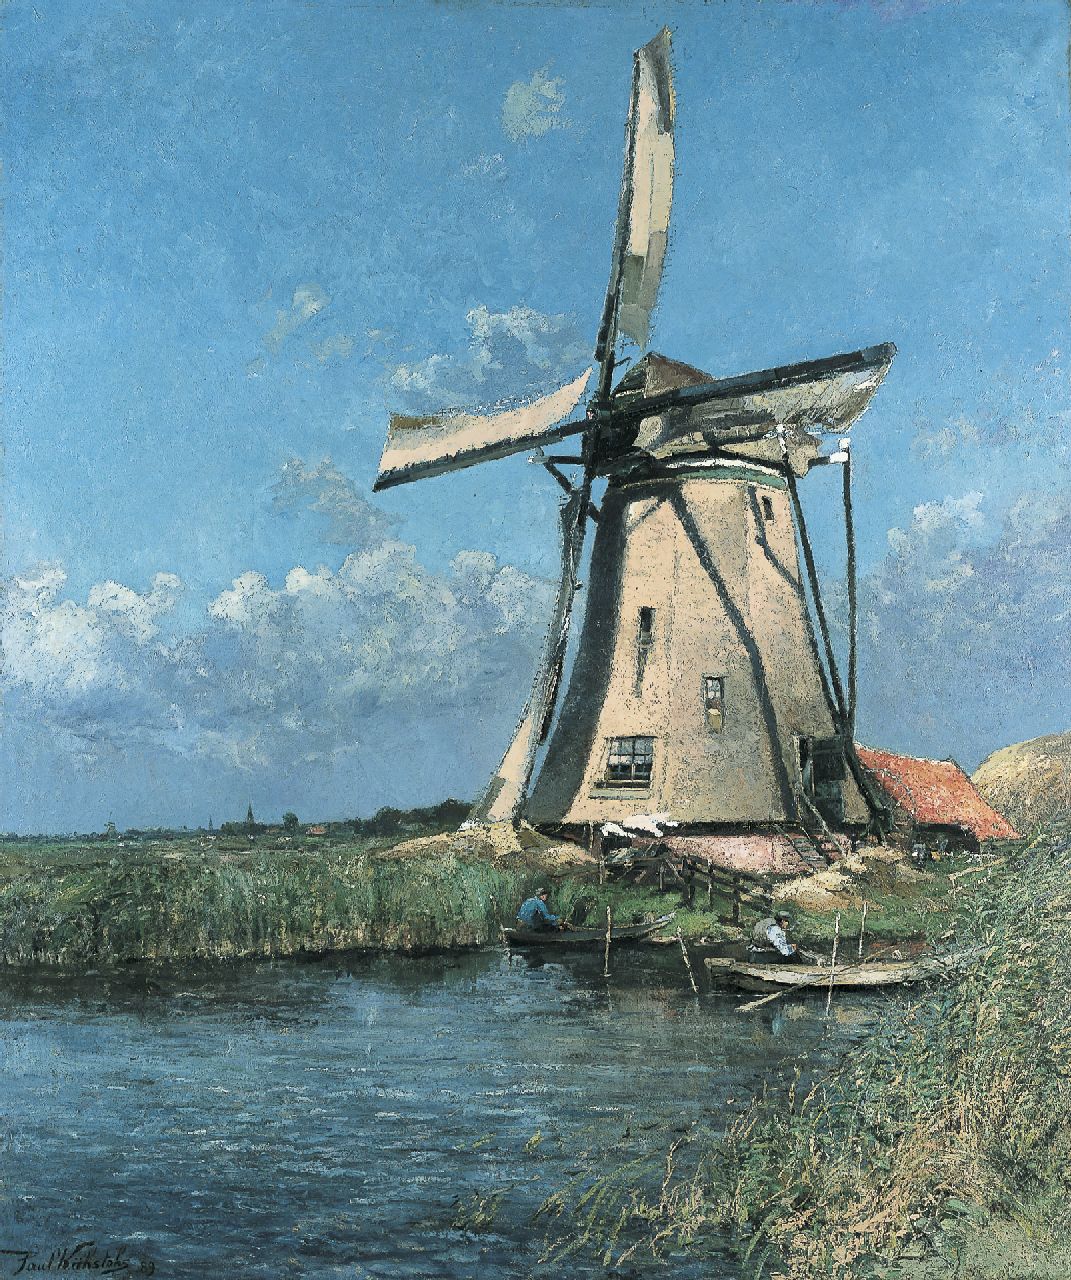 Kühstohs P.  | Paul Kühstohs, Windmill in the 'Vosse en Weerlanerpolder', oil on canvas 216.0 x 182.0 cm, signed l.l. and dated '89